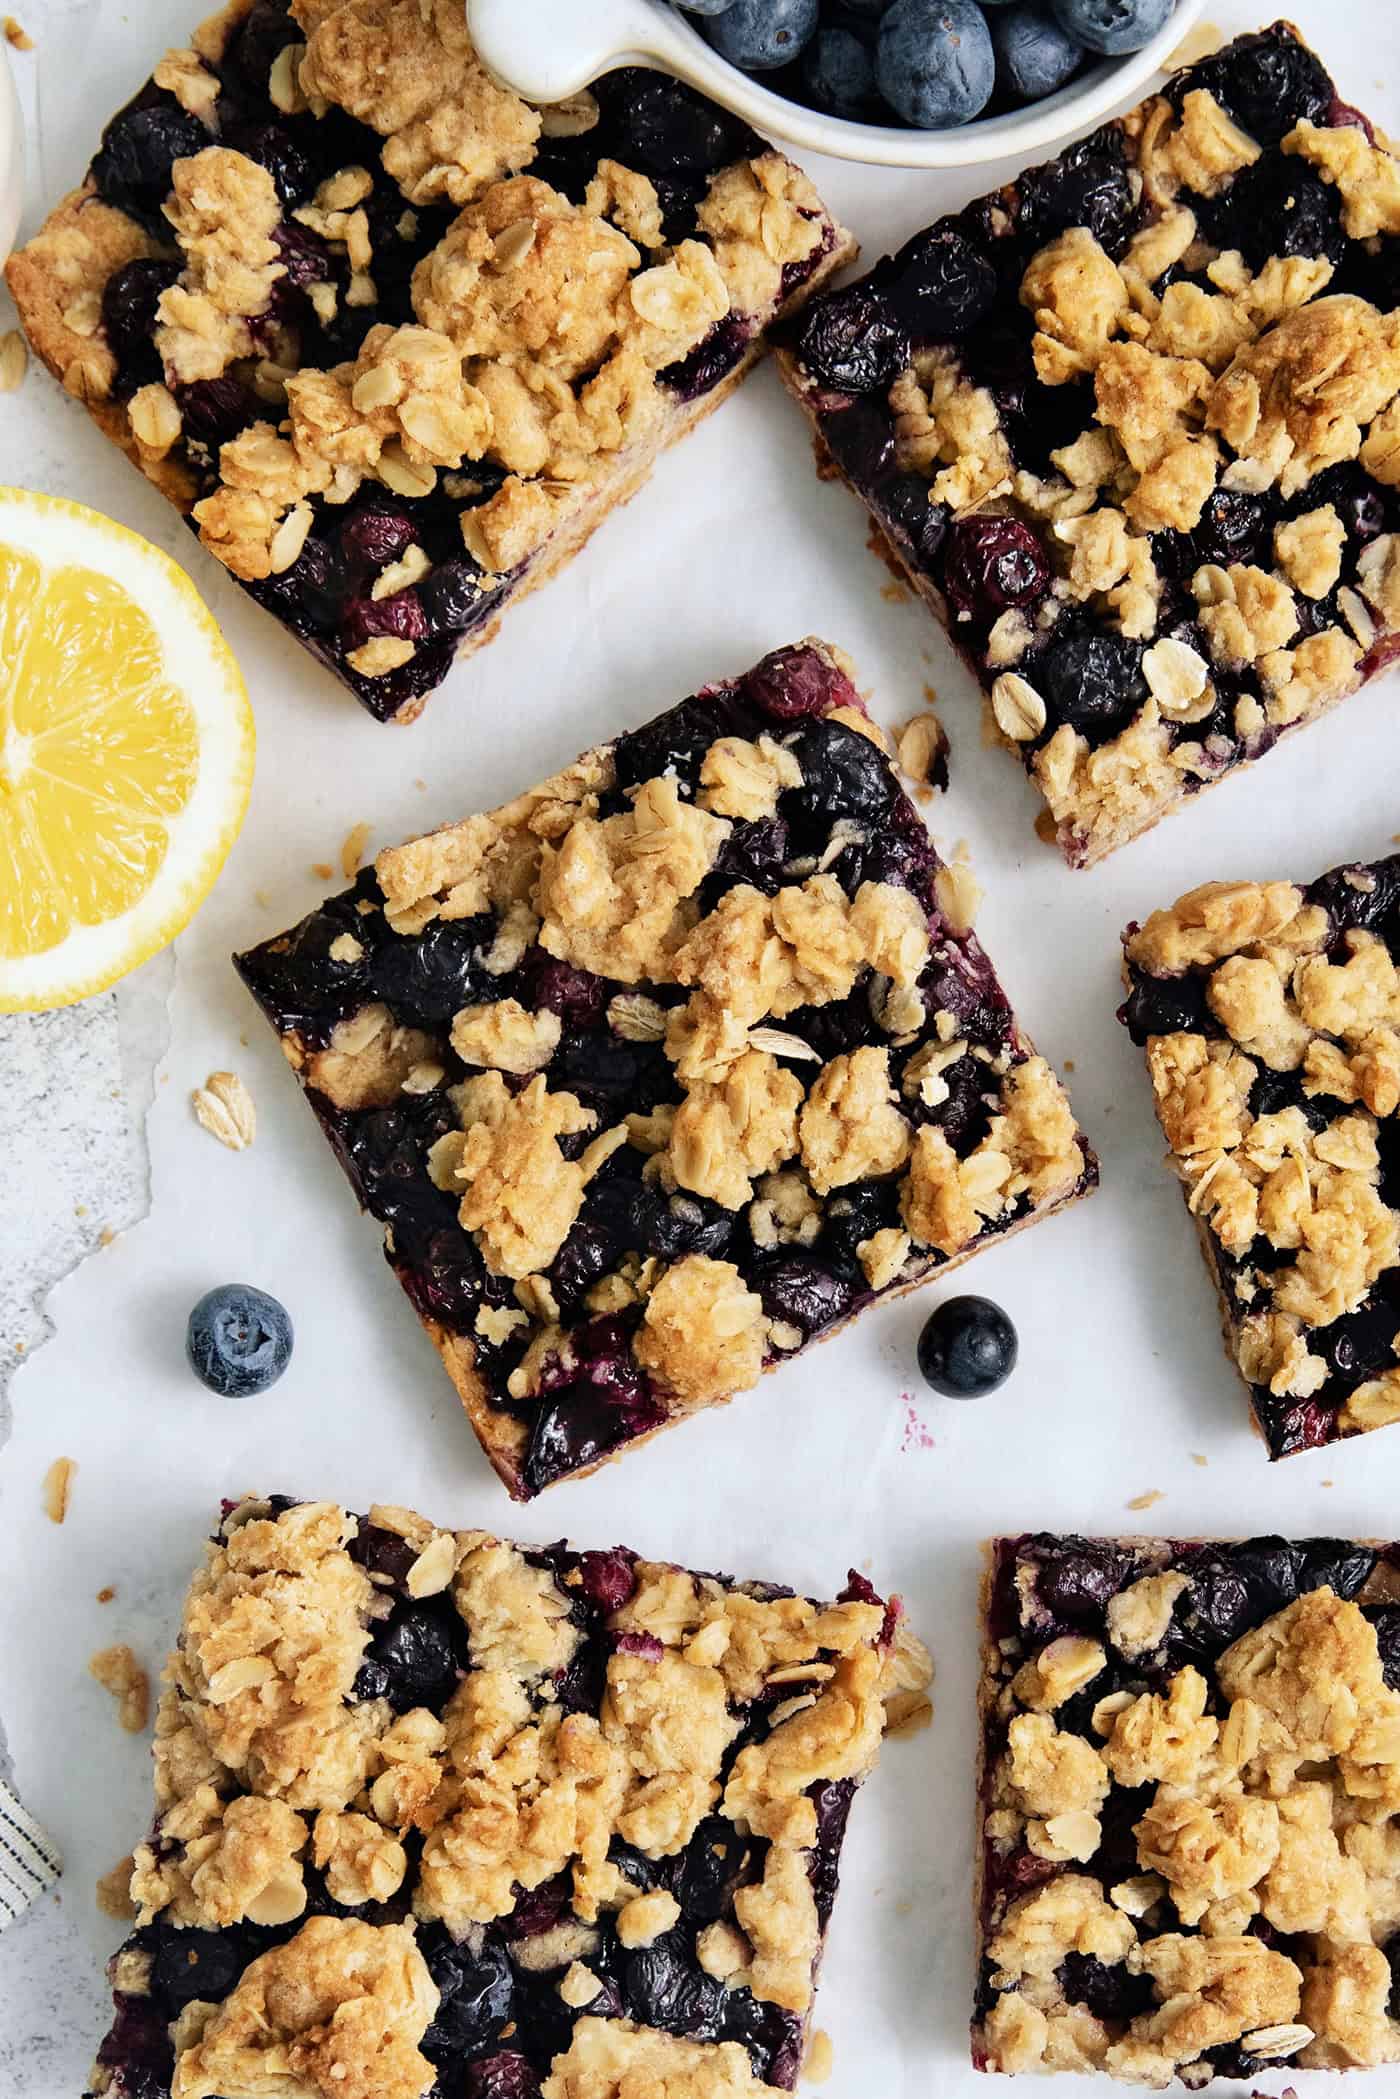 Six blueberry crumble bars on a white background.